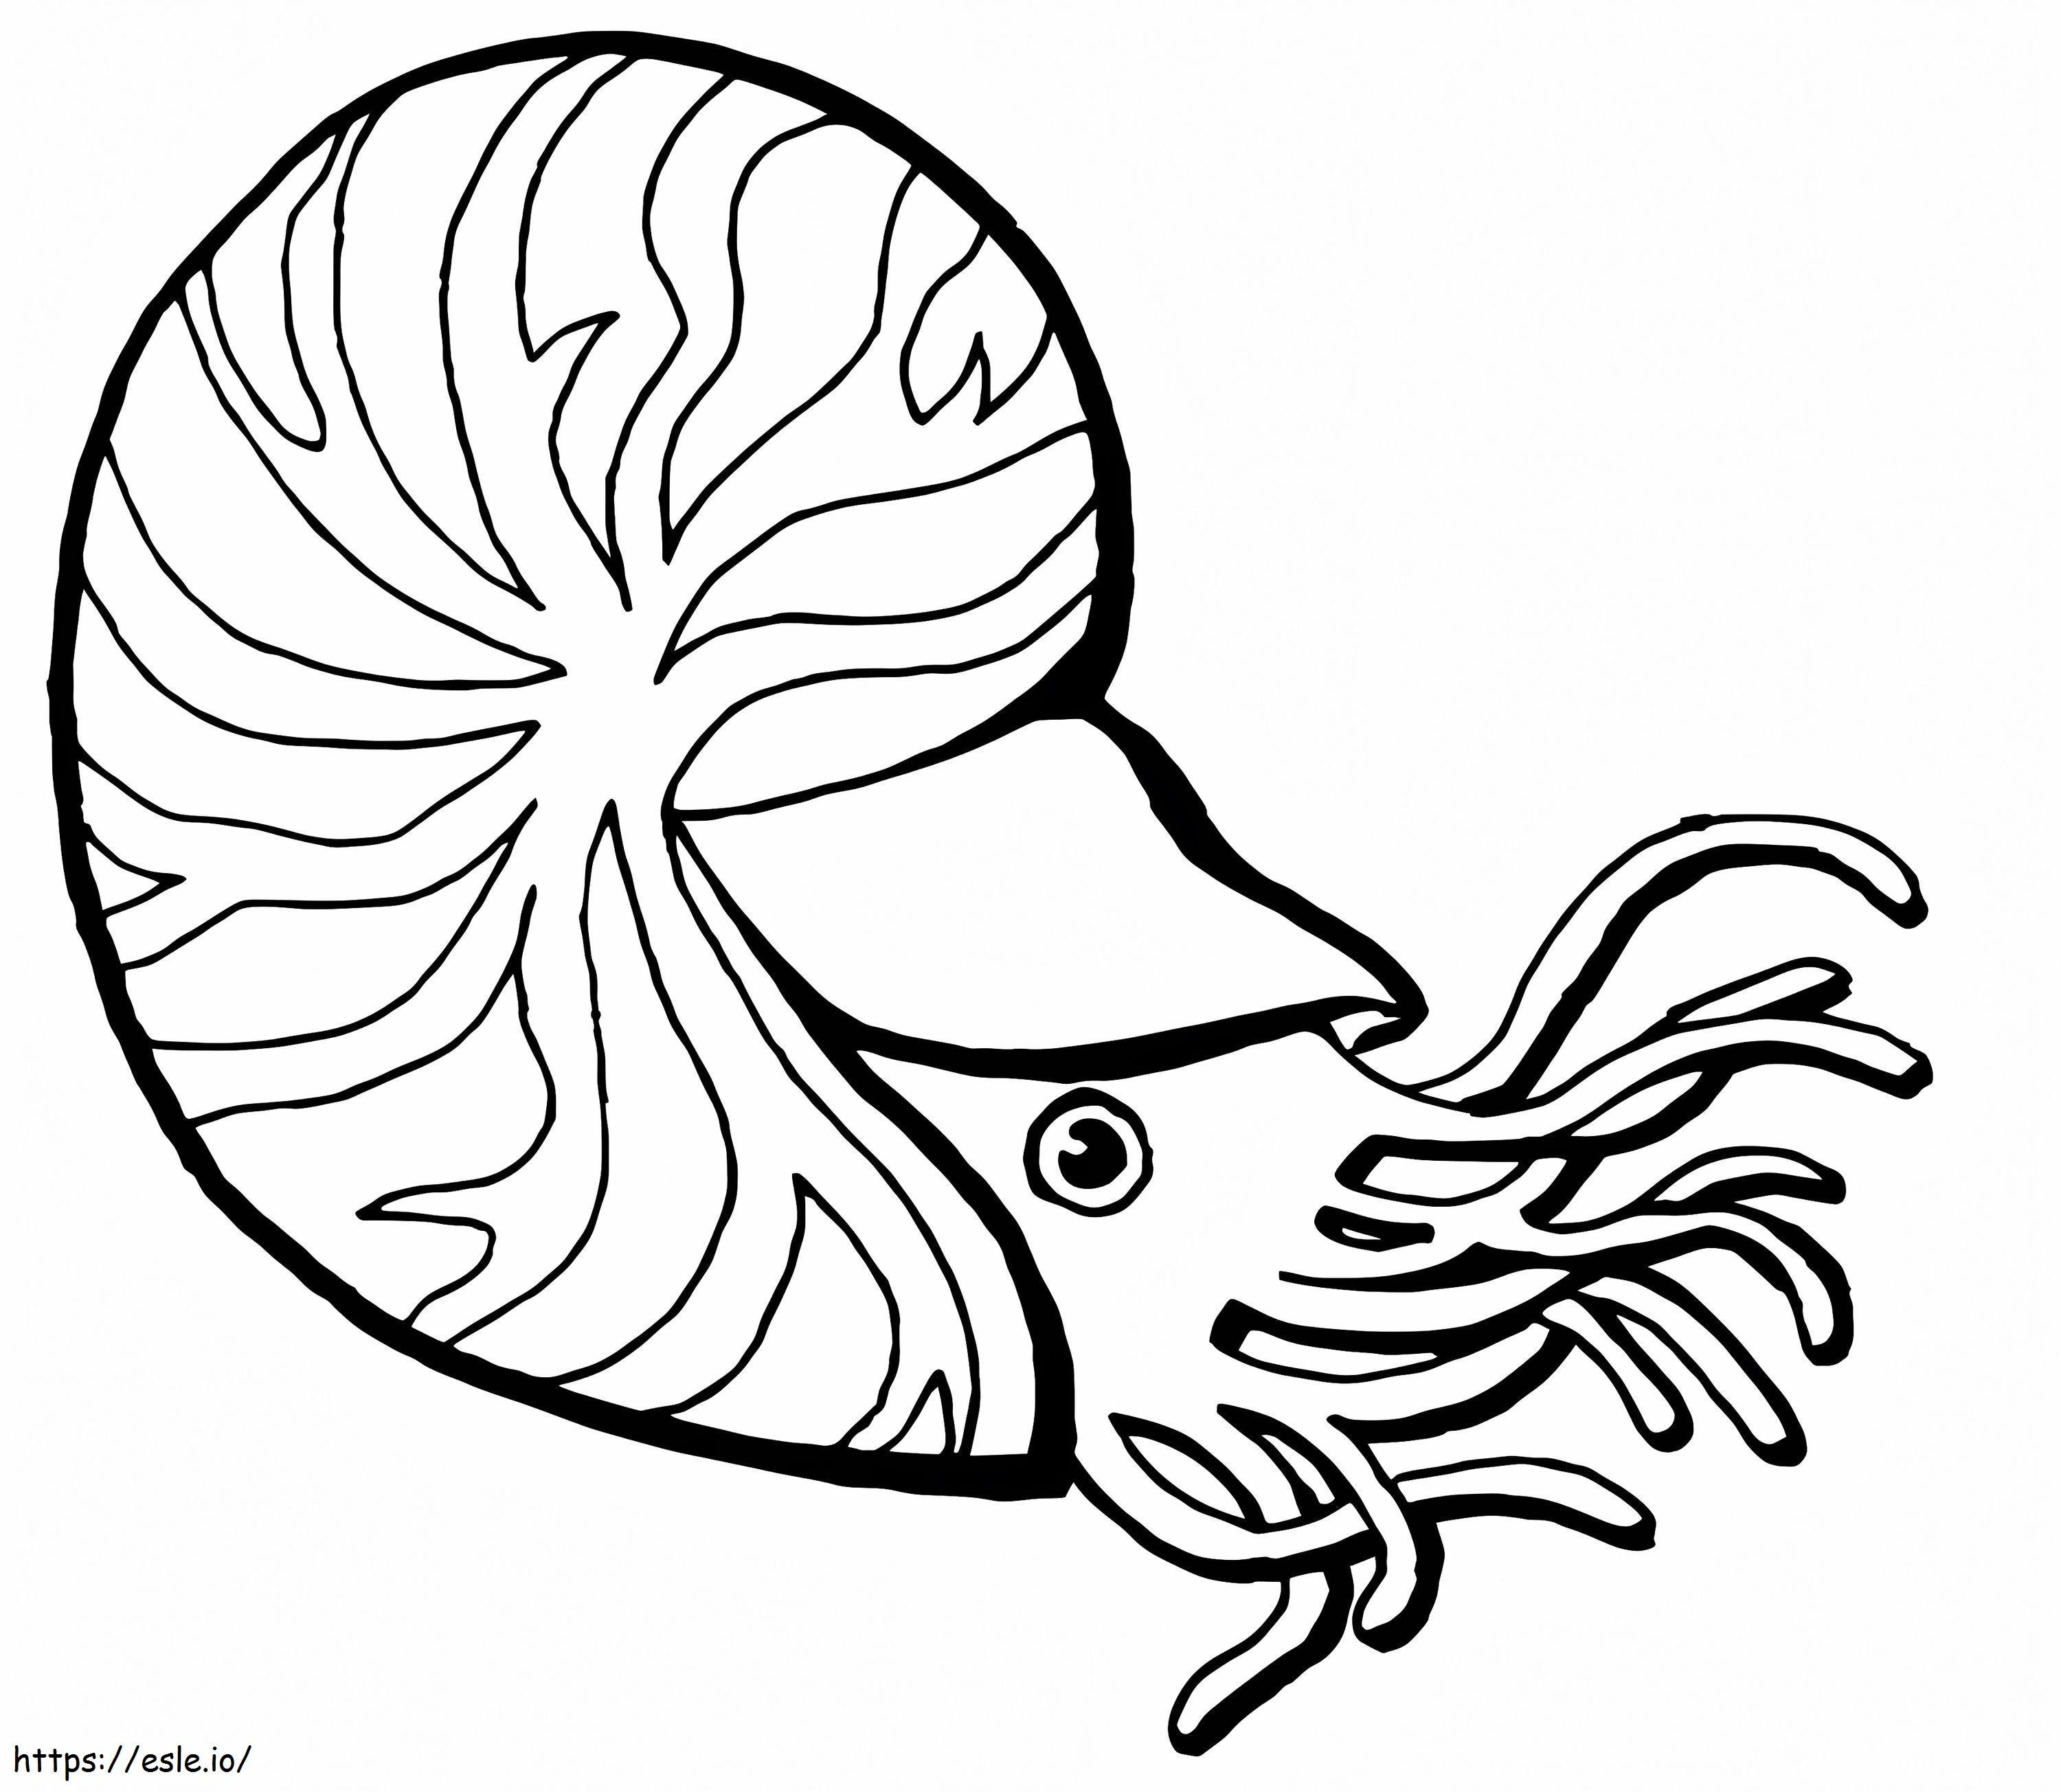 Chambered Nautilus 1 coloring page